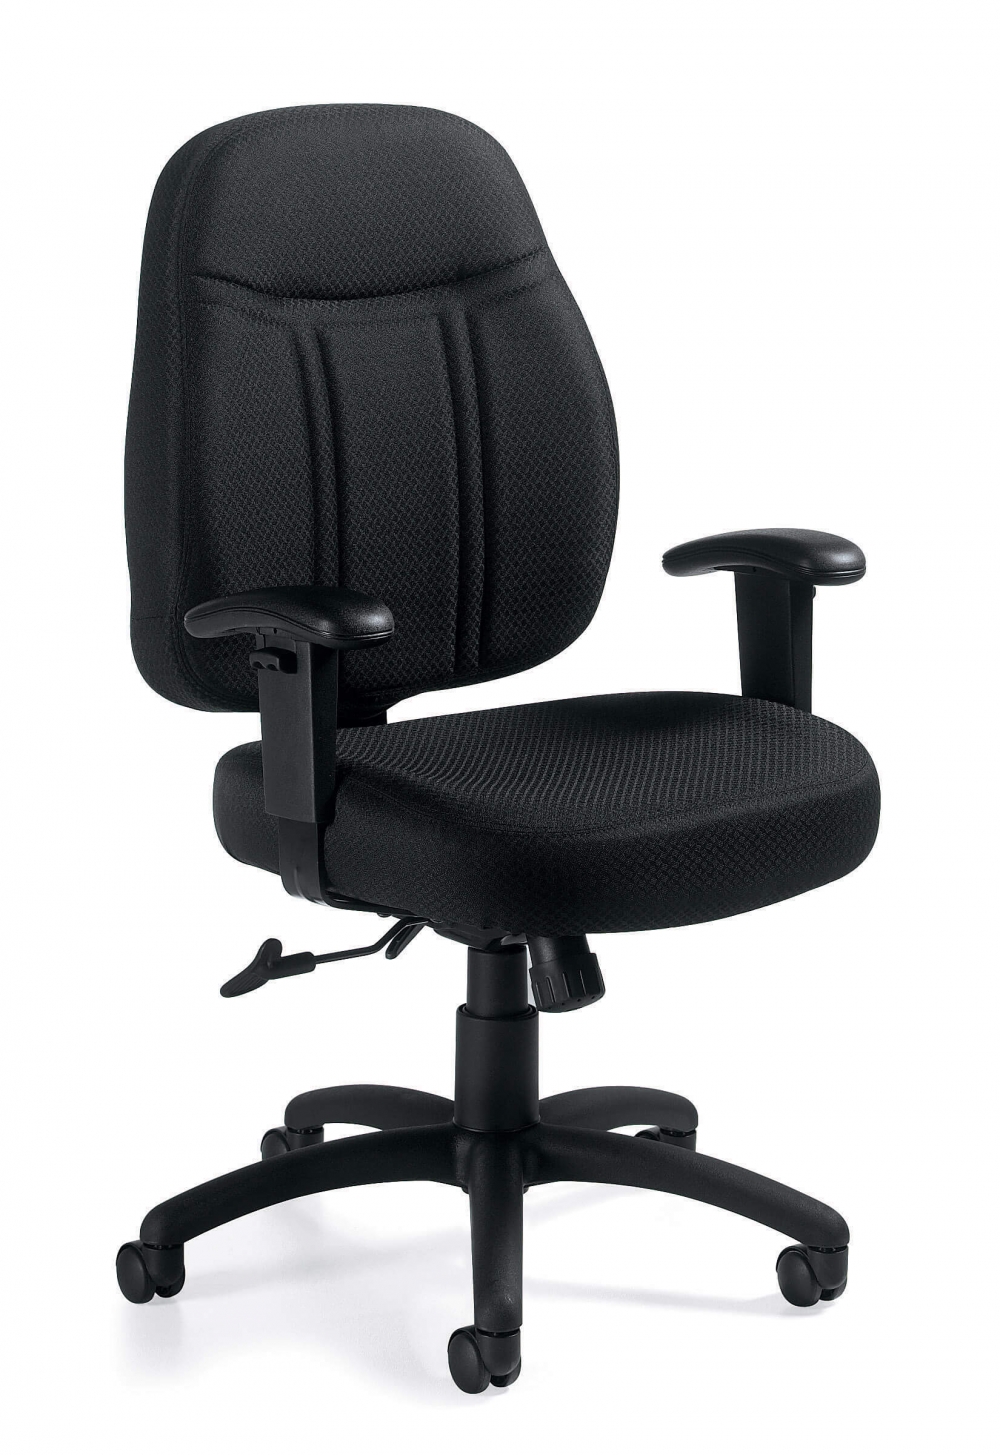 office-furniture-chairs-business-chairs.jpg